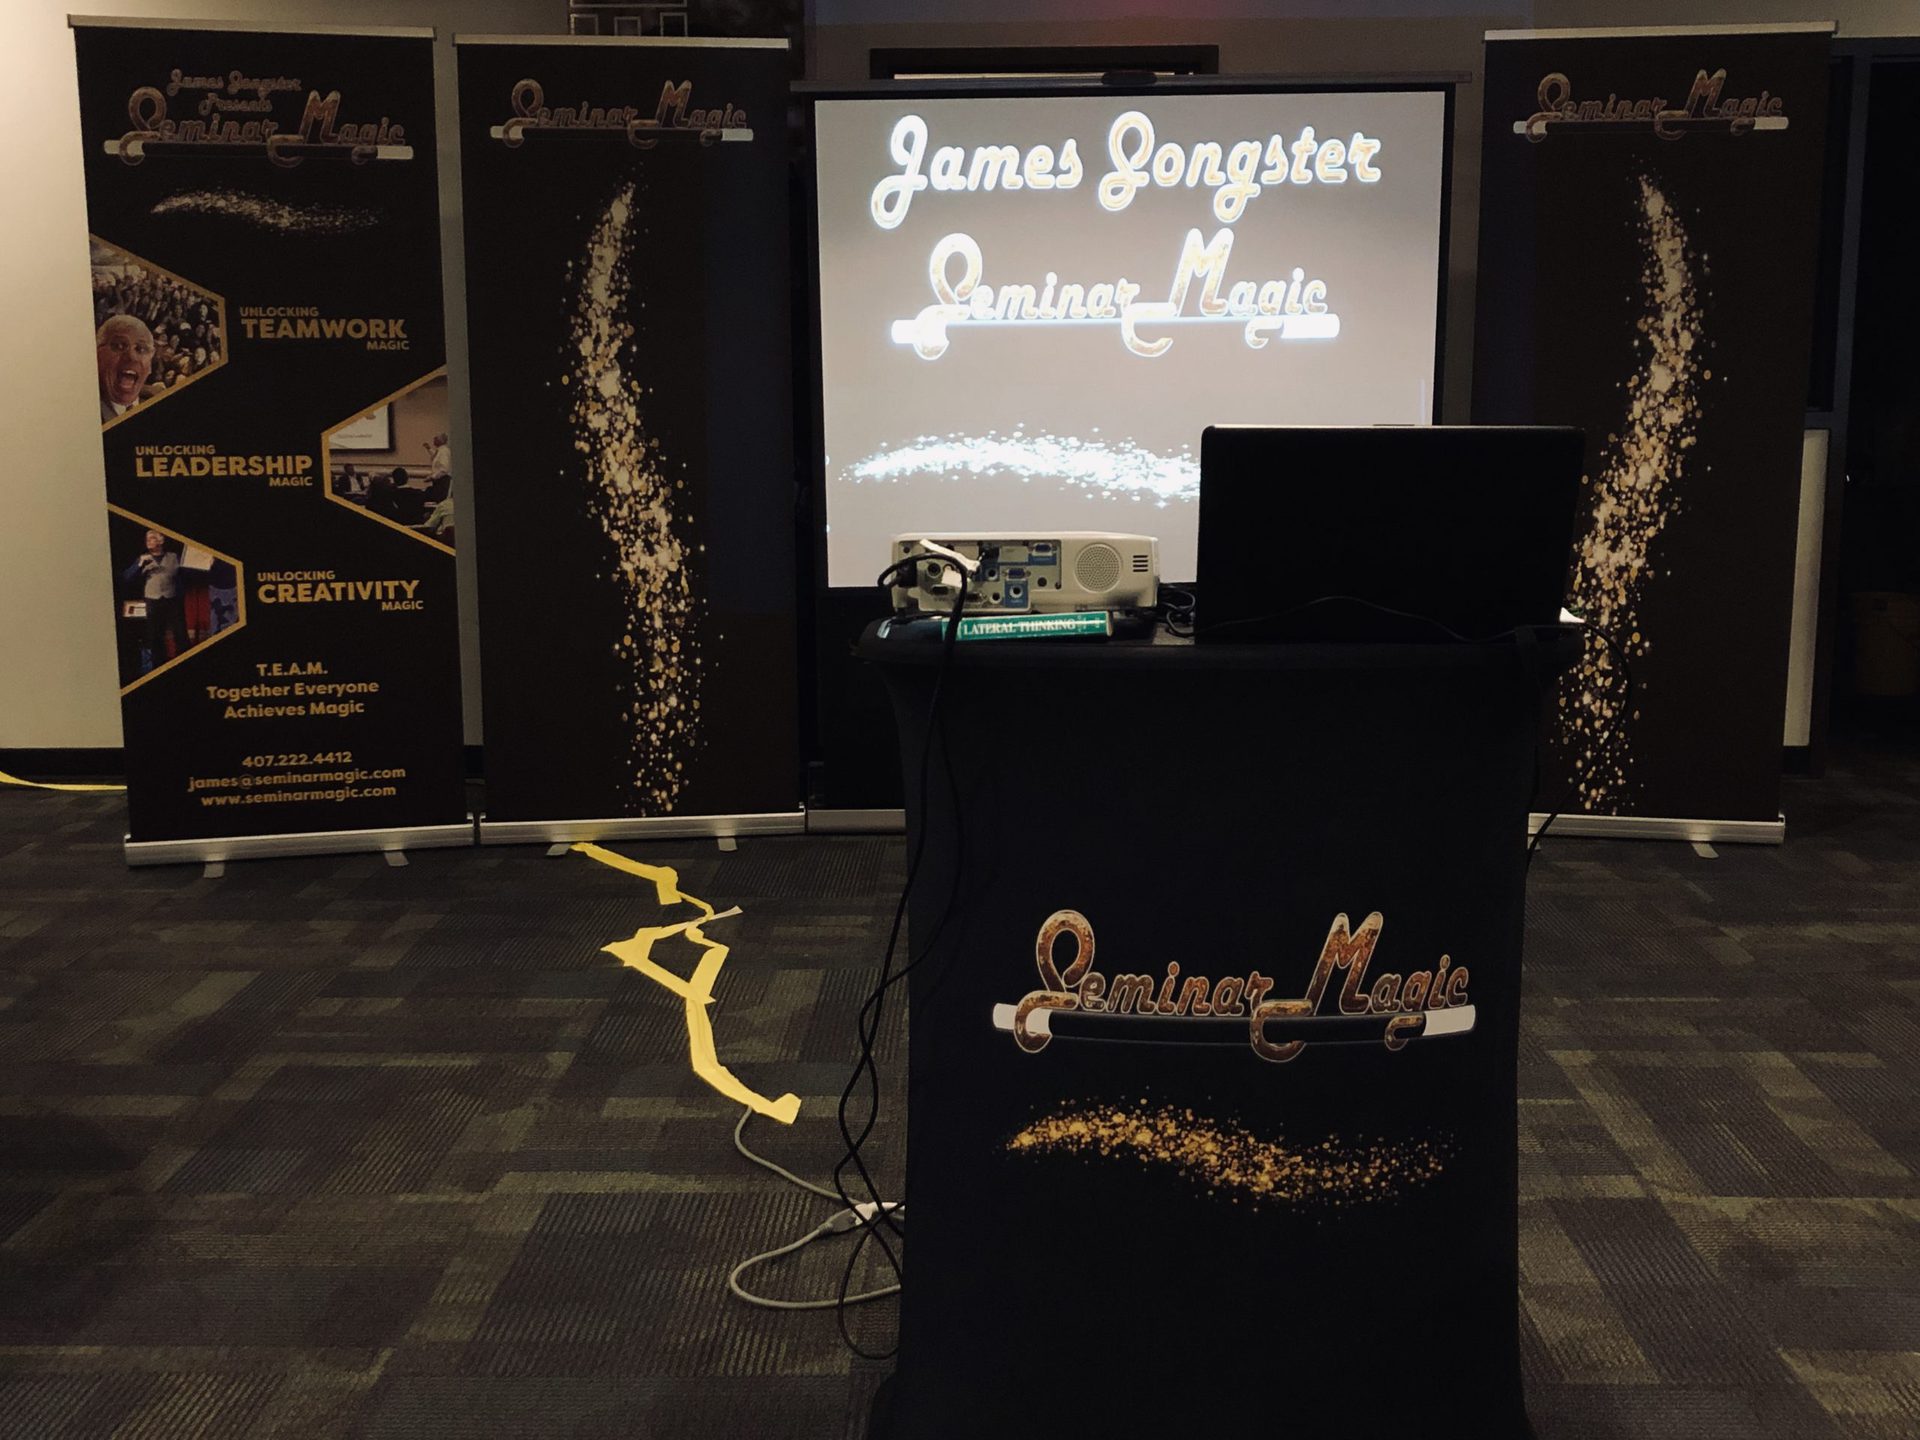 James Songster presents Seminar Magic in a Powerpoint